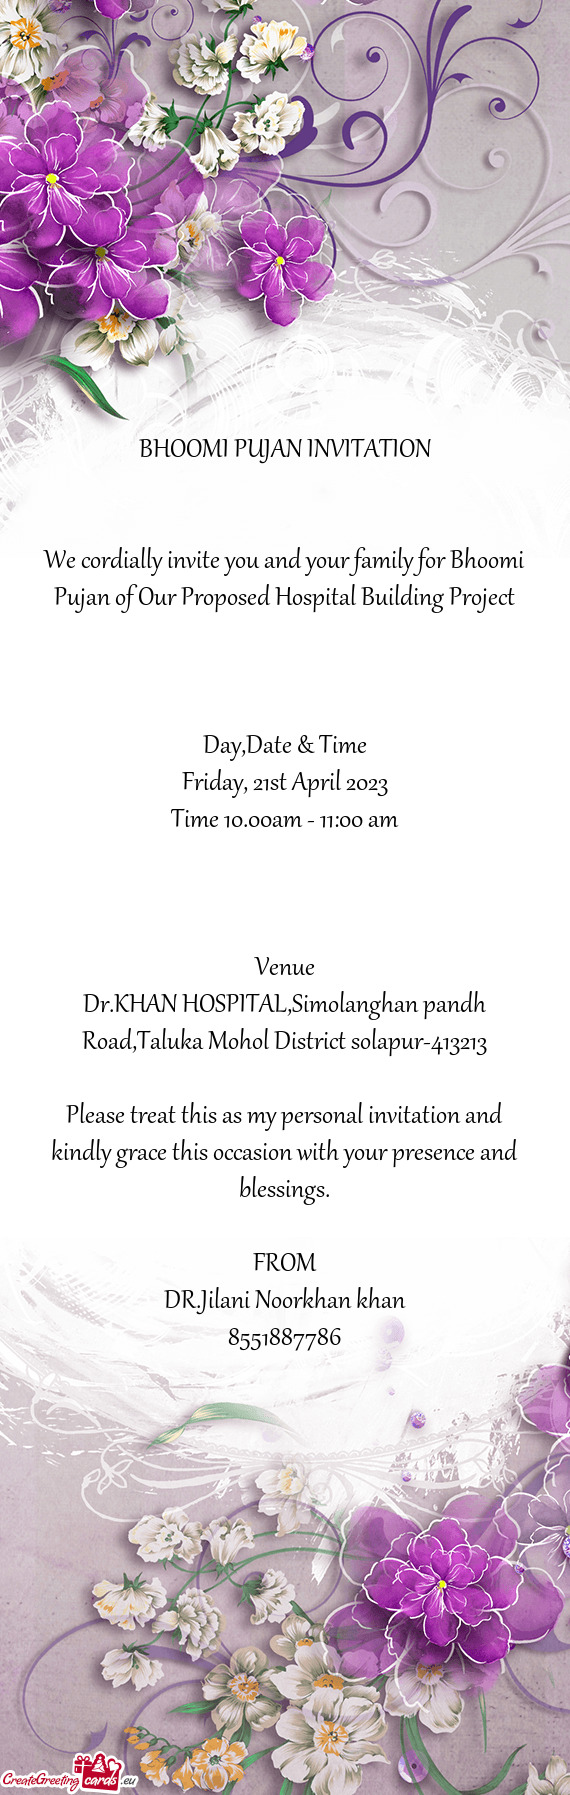 We cordially invite you and your family for Bhoomi Pujan of Our Proposed Hospital Building Project